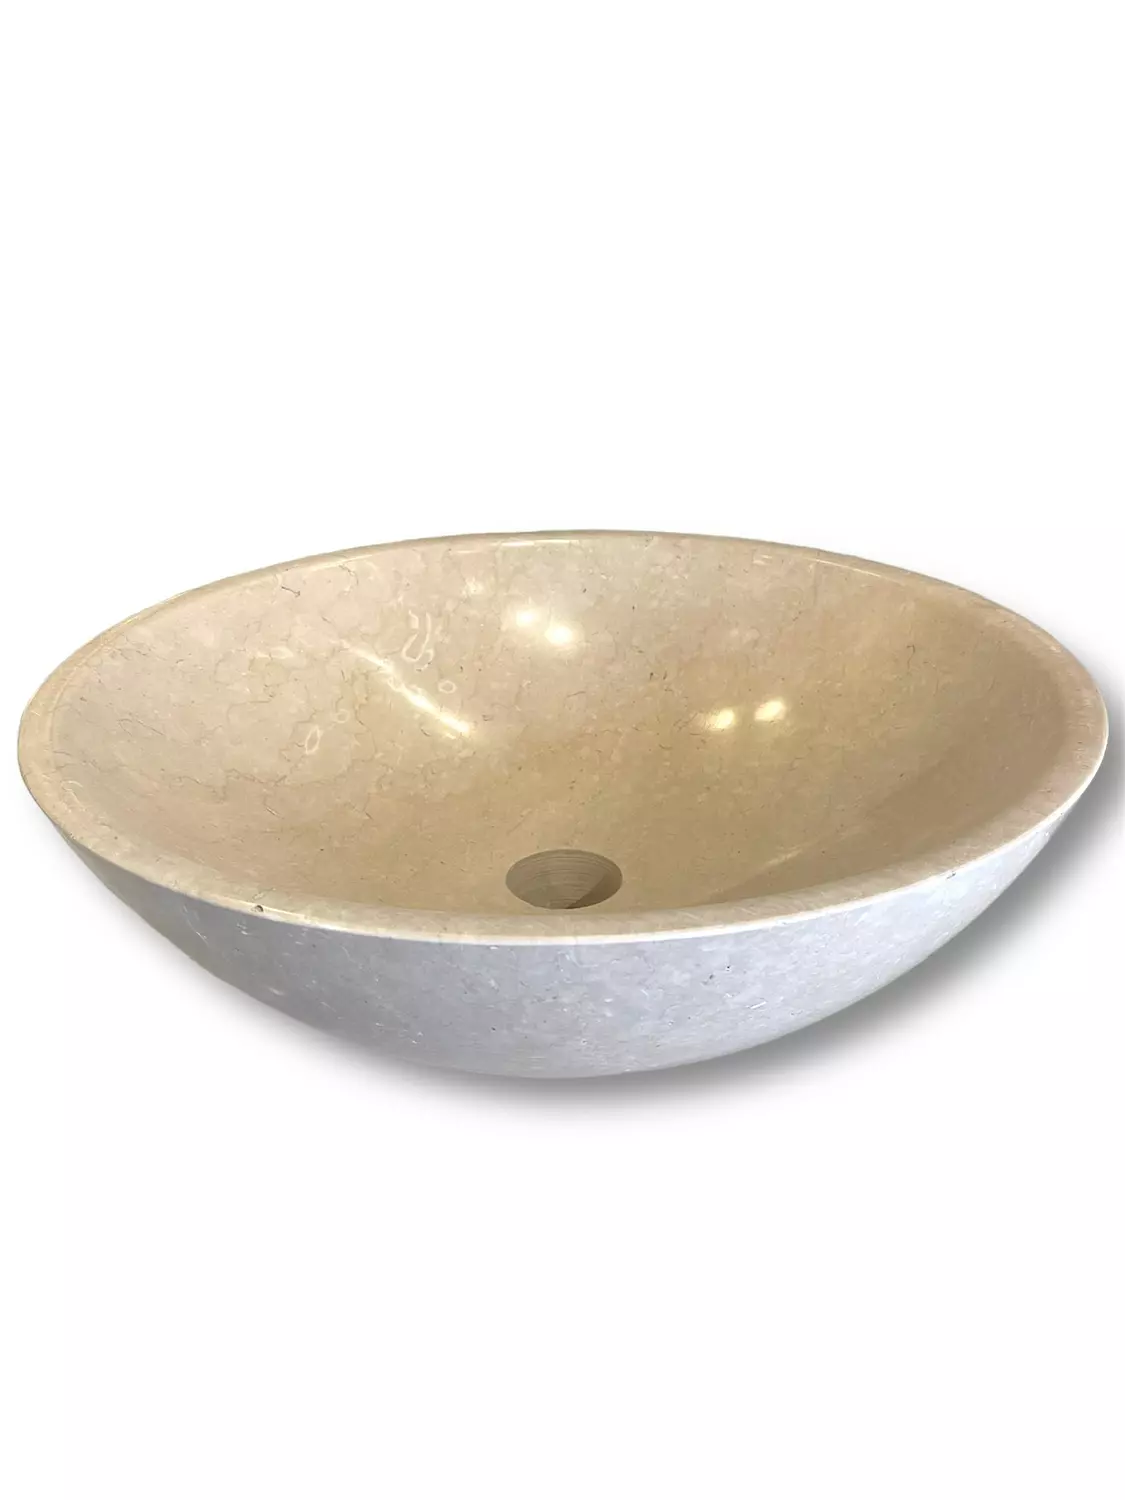 Marble Sink hover image